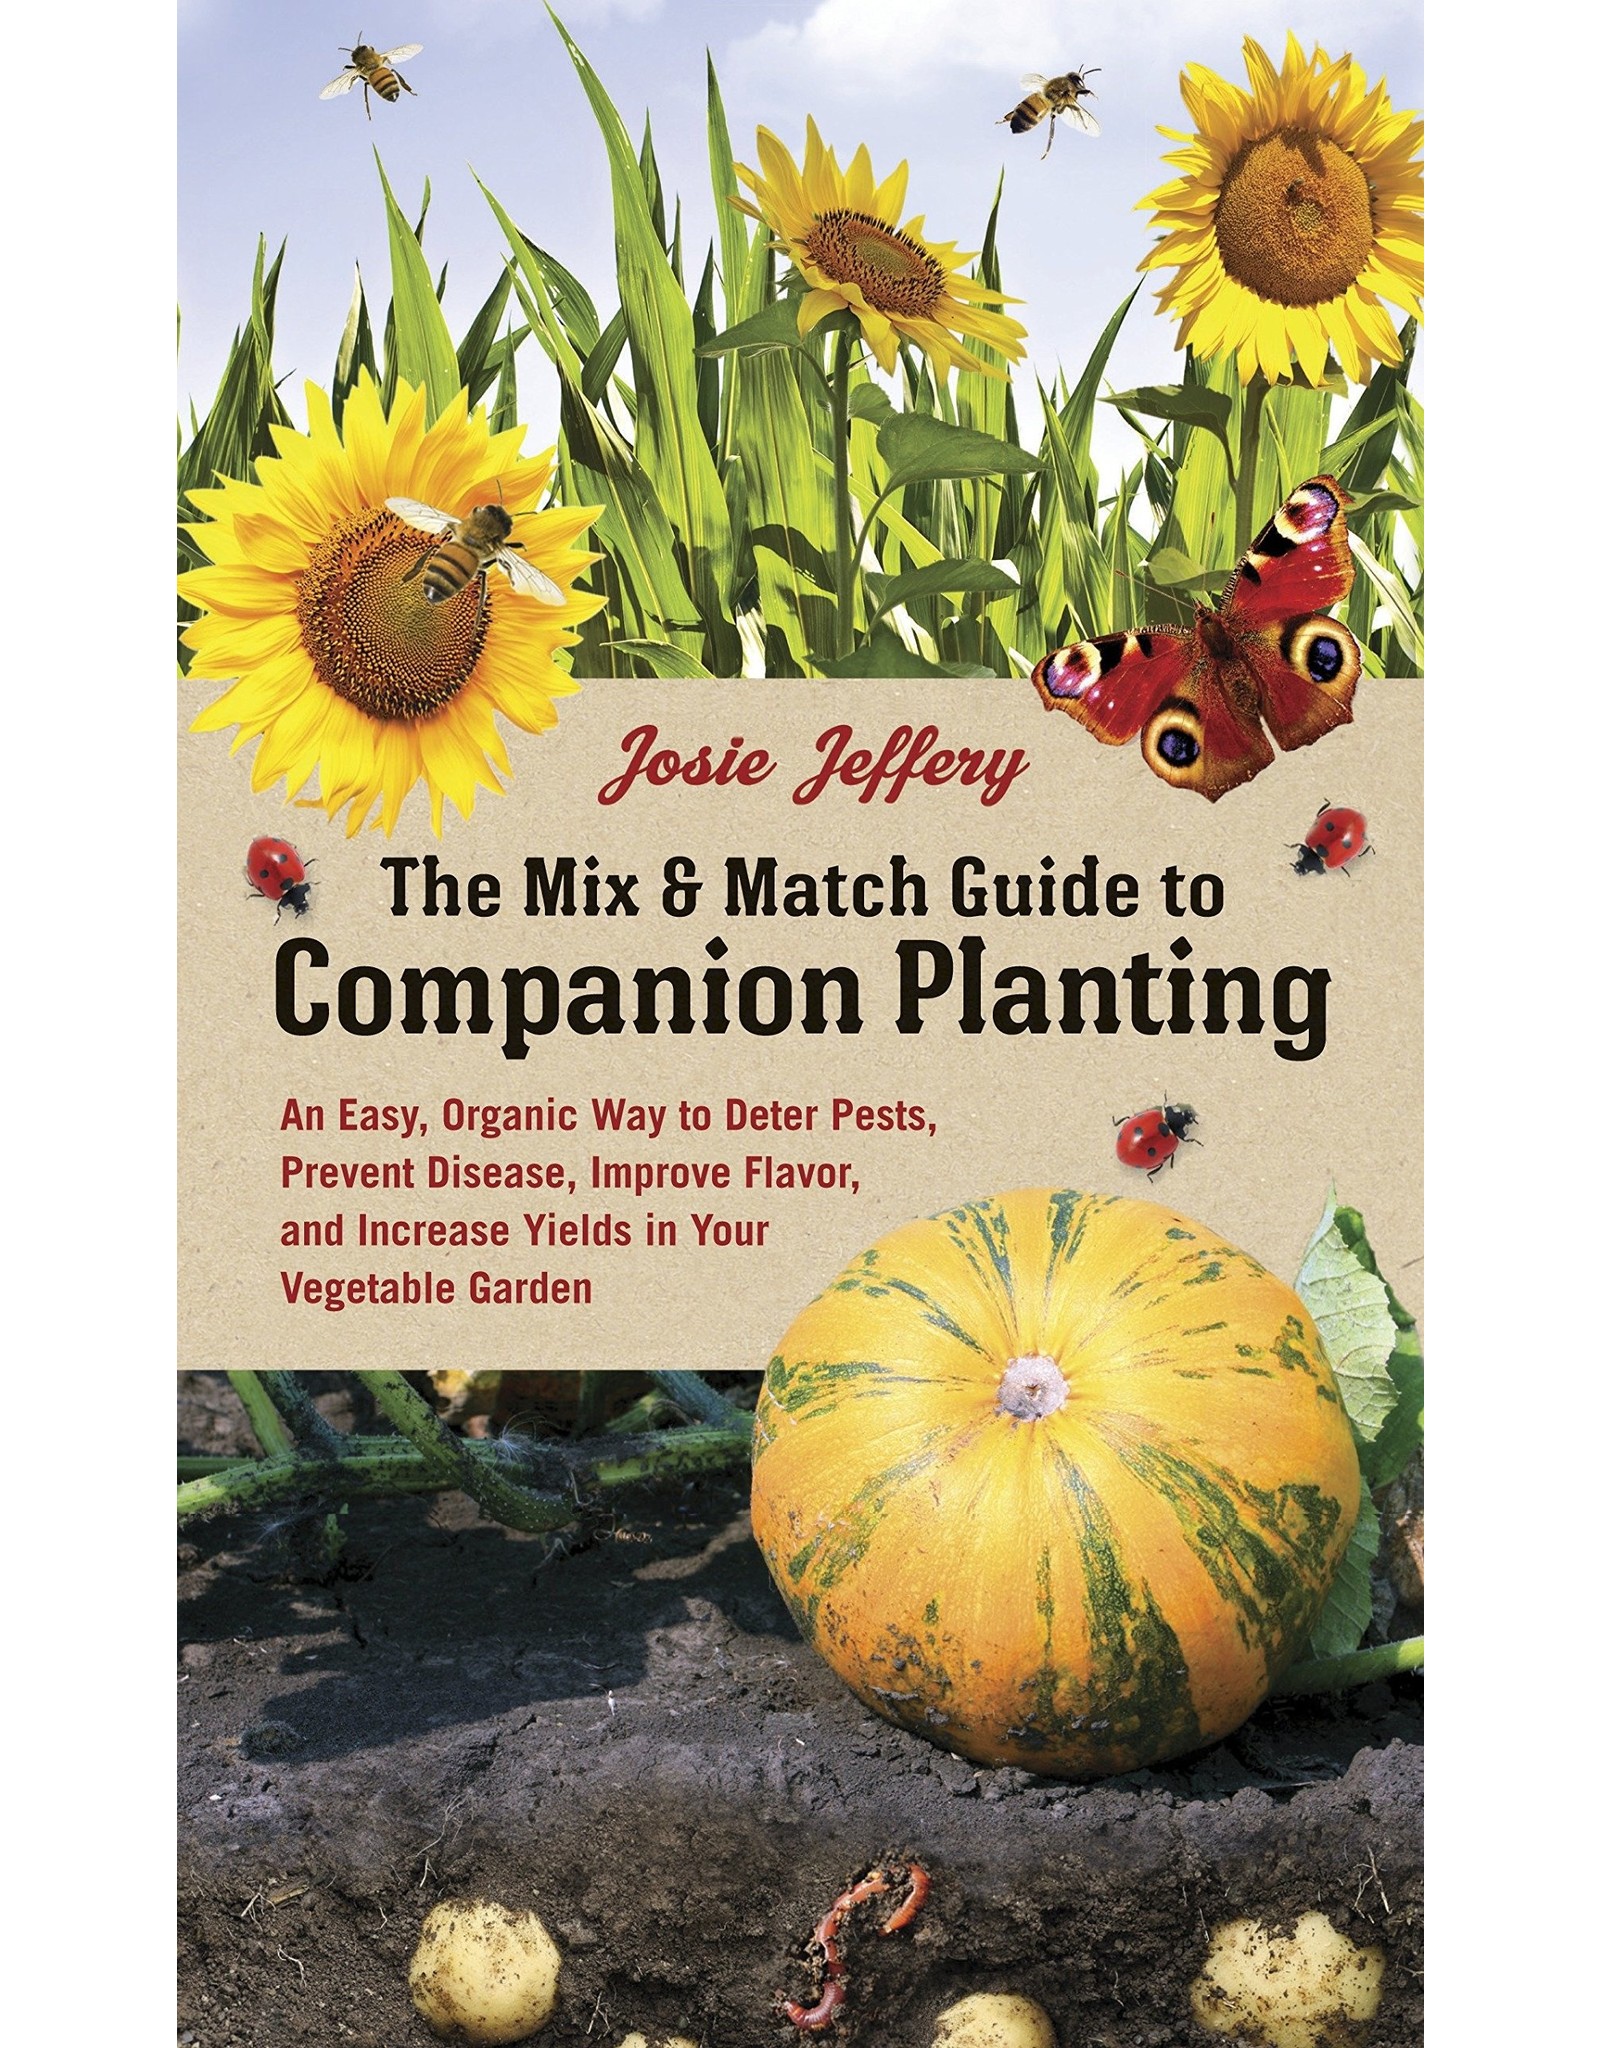 Literature The Mix & Match Guide to Companion Planting: An Easy, Organized Way to Deter Pests, Prevent Disease